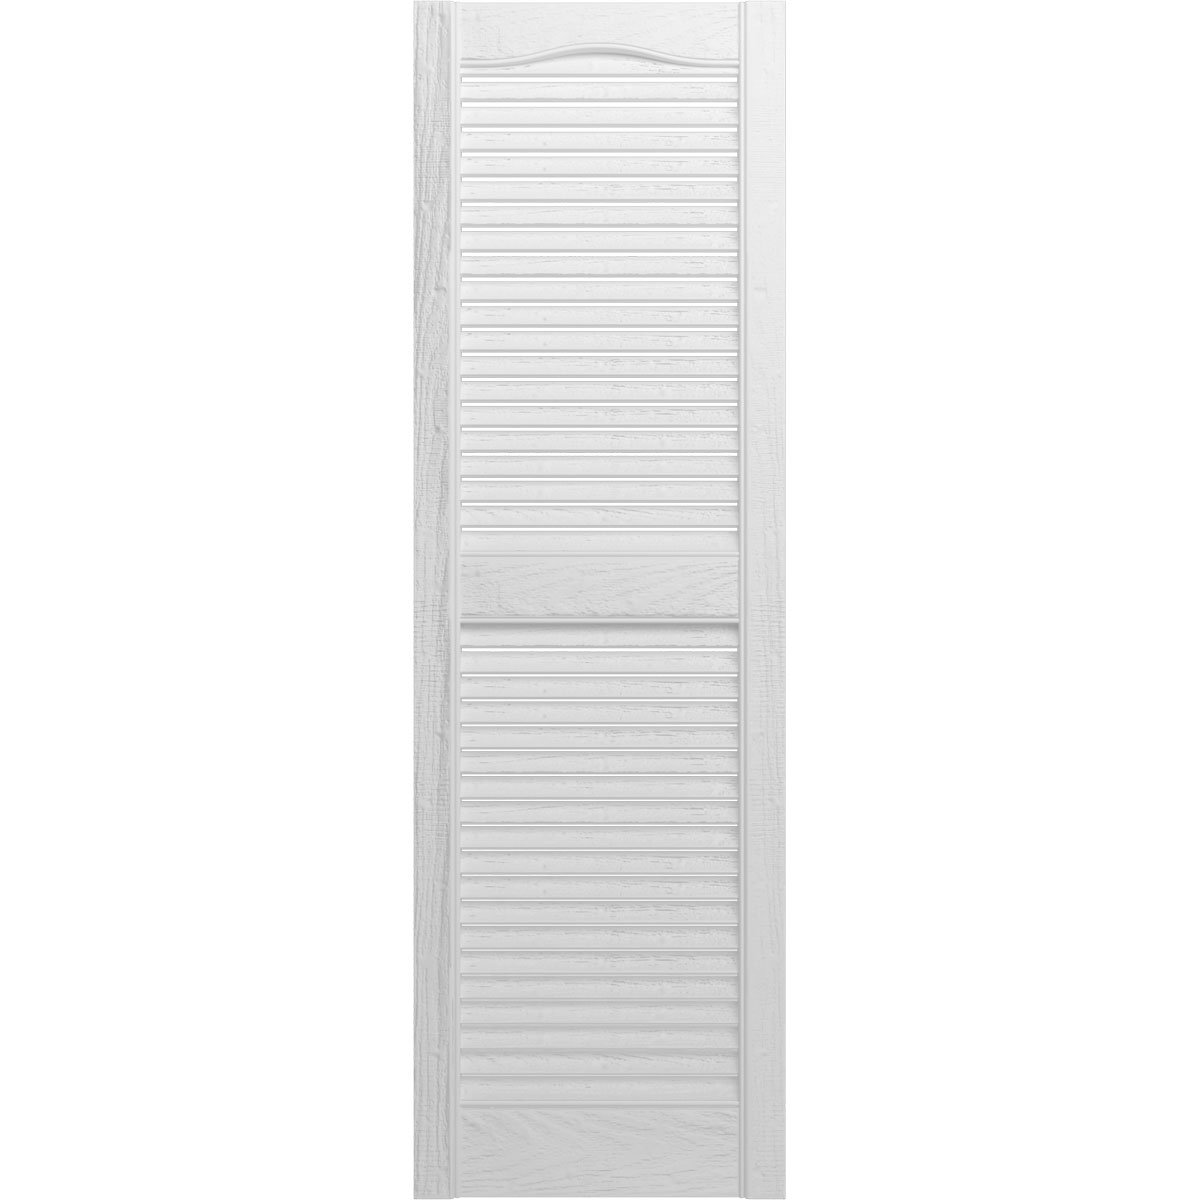 1 Pair 14.5 x 60 001 White Mid America Cathedral Open Louver Vinyl Standard Shutter 